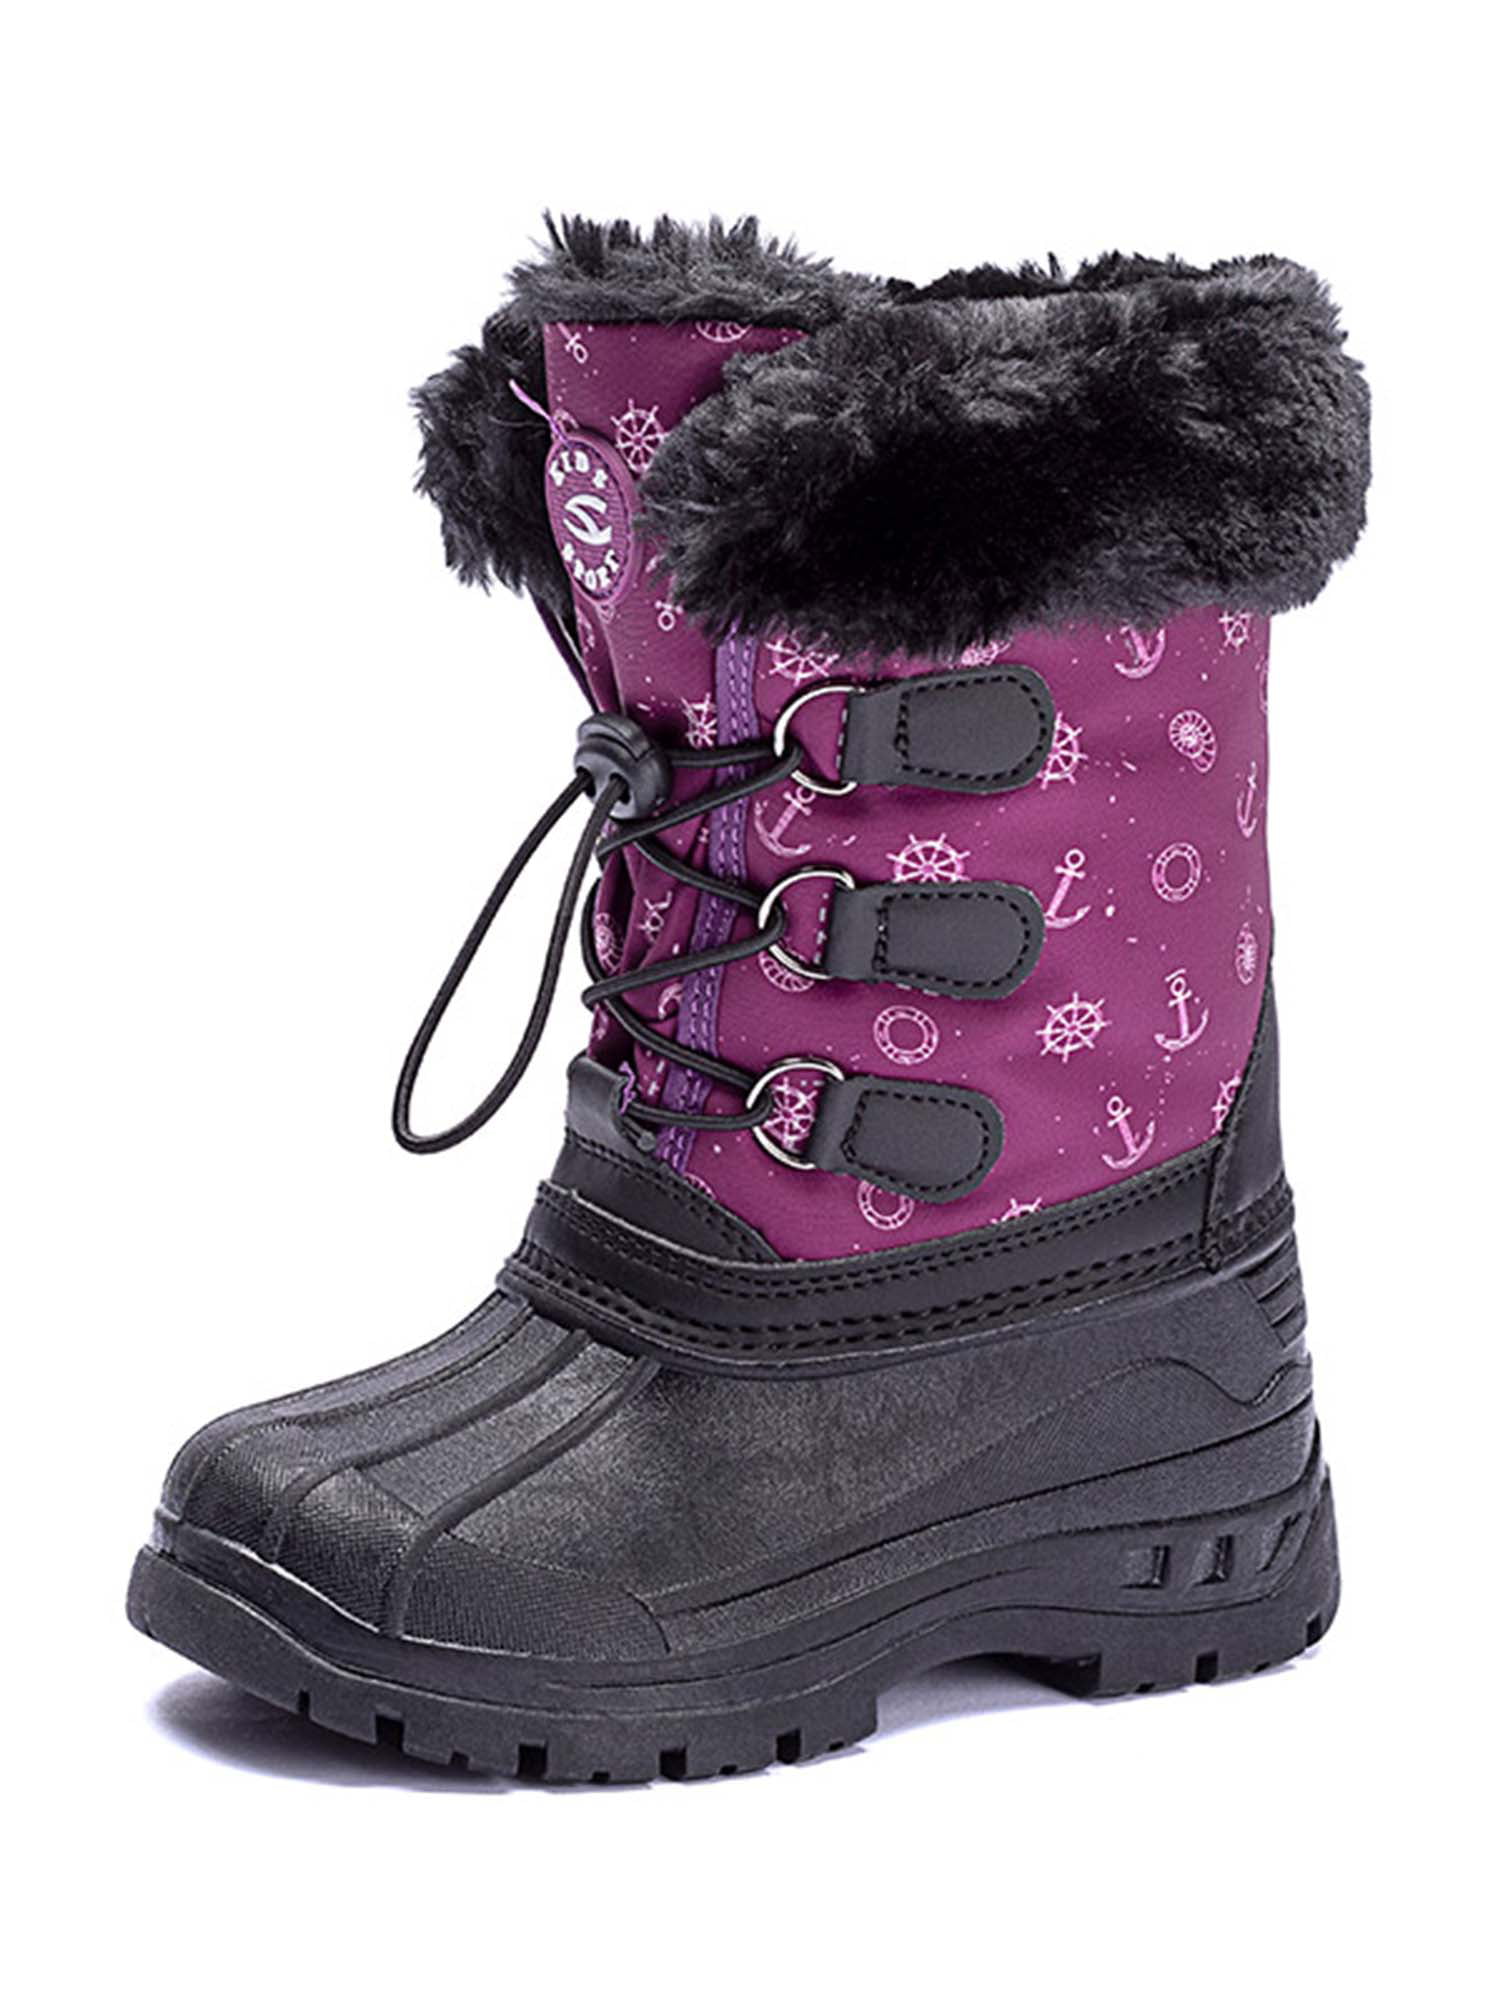 Toddler/Little Kid/Big Kid Snow Boots Outdoor Waterproof Cold Weather Winter Boots for Boys and Girls 